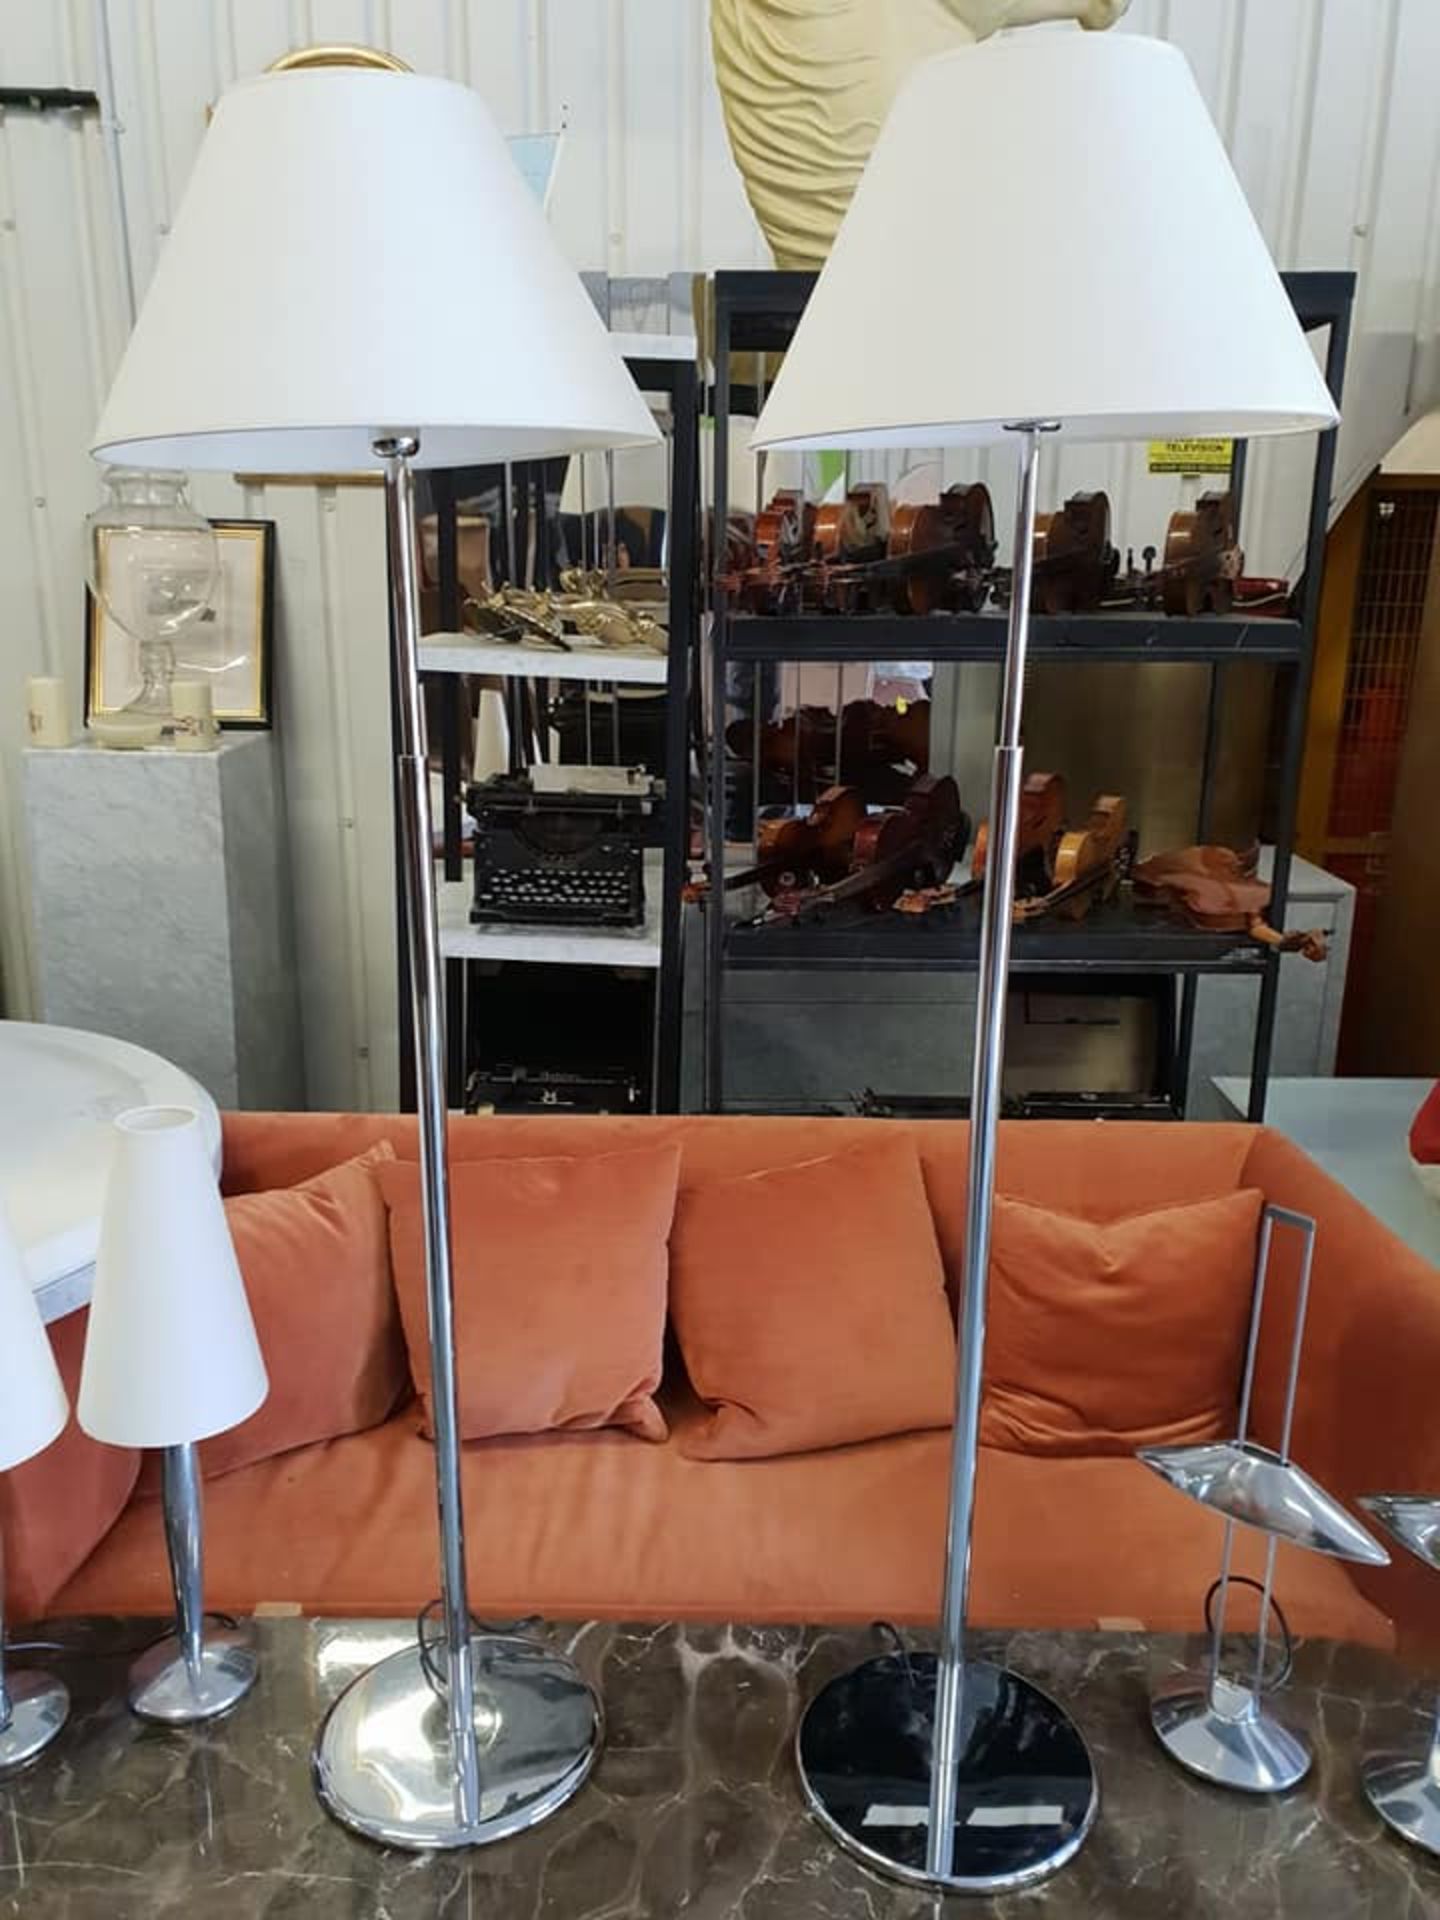 **Clearance** 2 X Floor Standard Lamp Polished Steel Chrome Complete Modern Classic Look With This